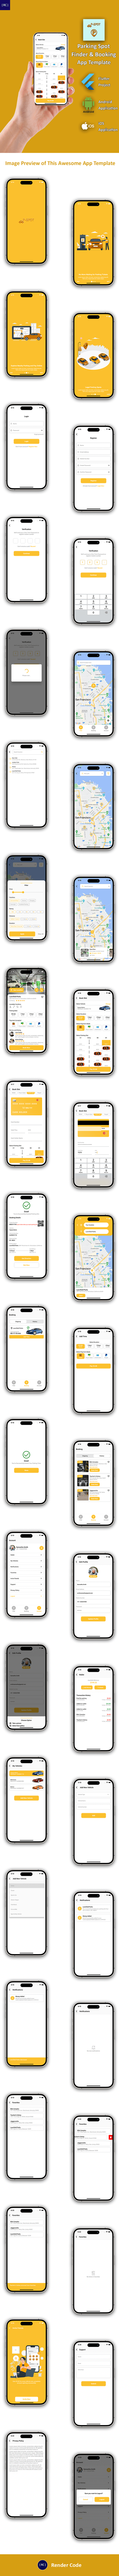 Parking Spot Finder & Booking Android App Template + iOS App Template | Flutter | ParkingSpot - 10